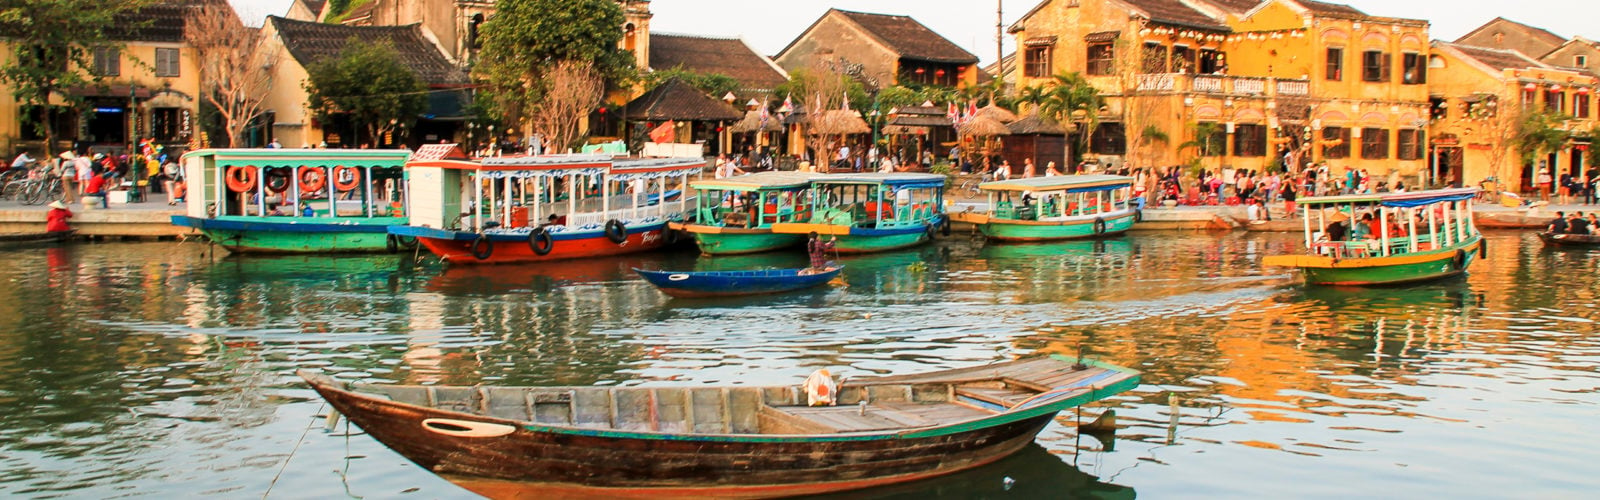 River view over Hoi An with traditional boats in Vietnam